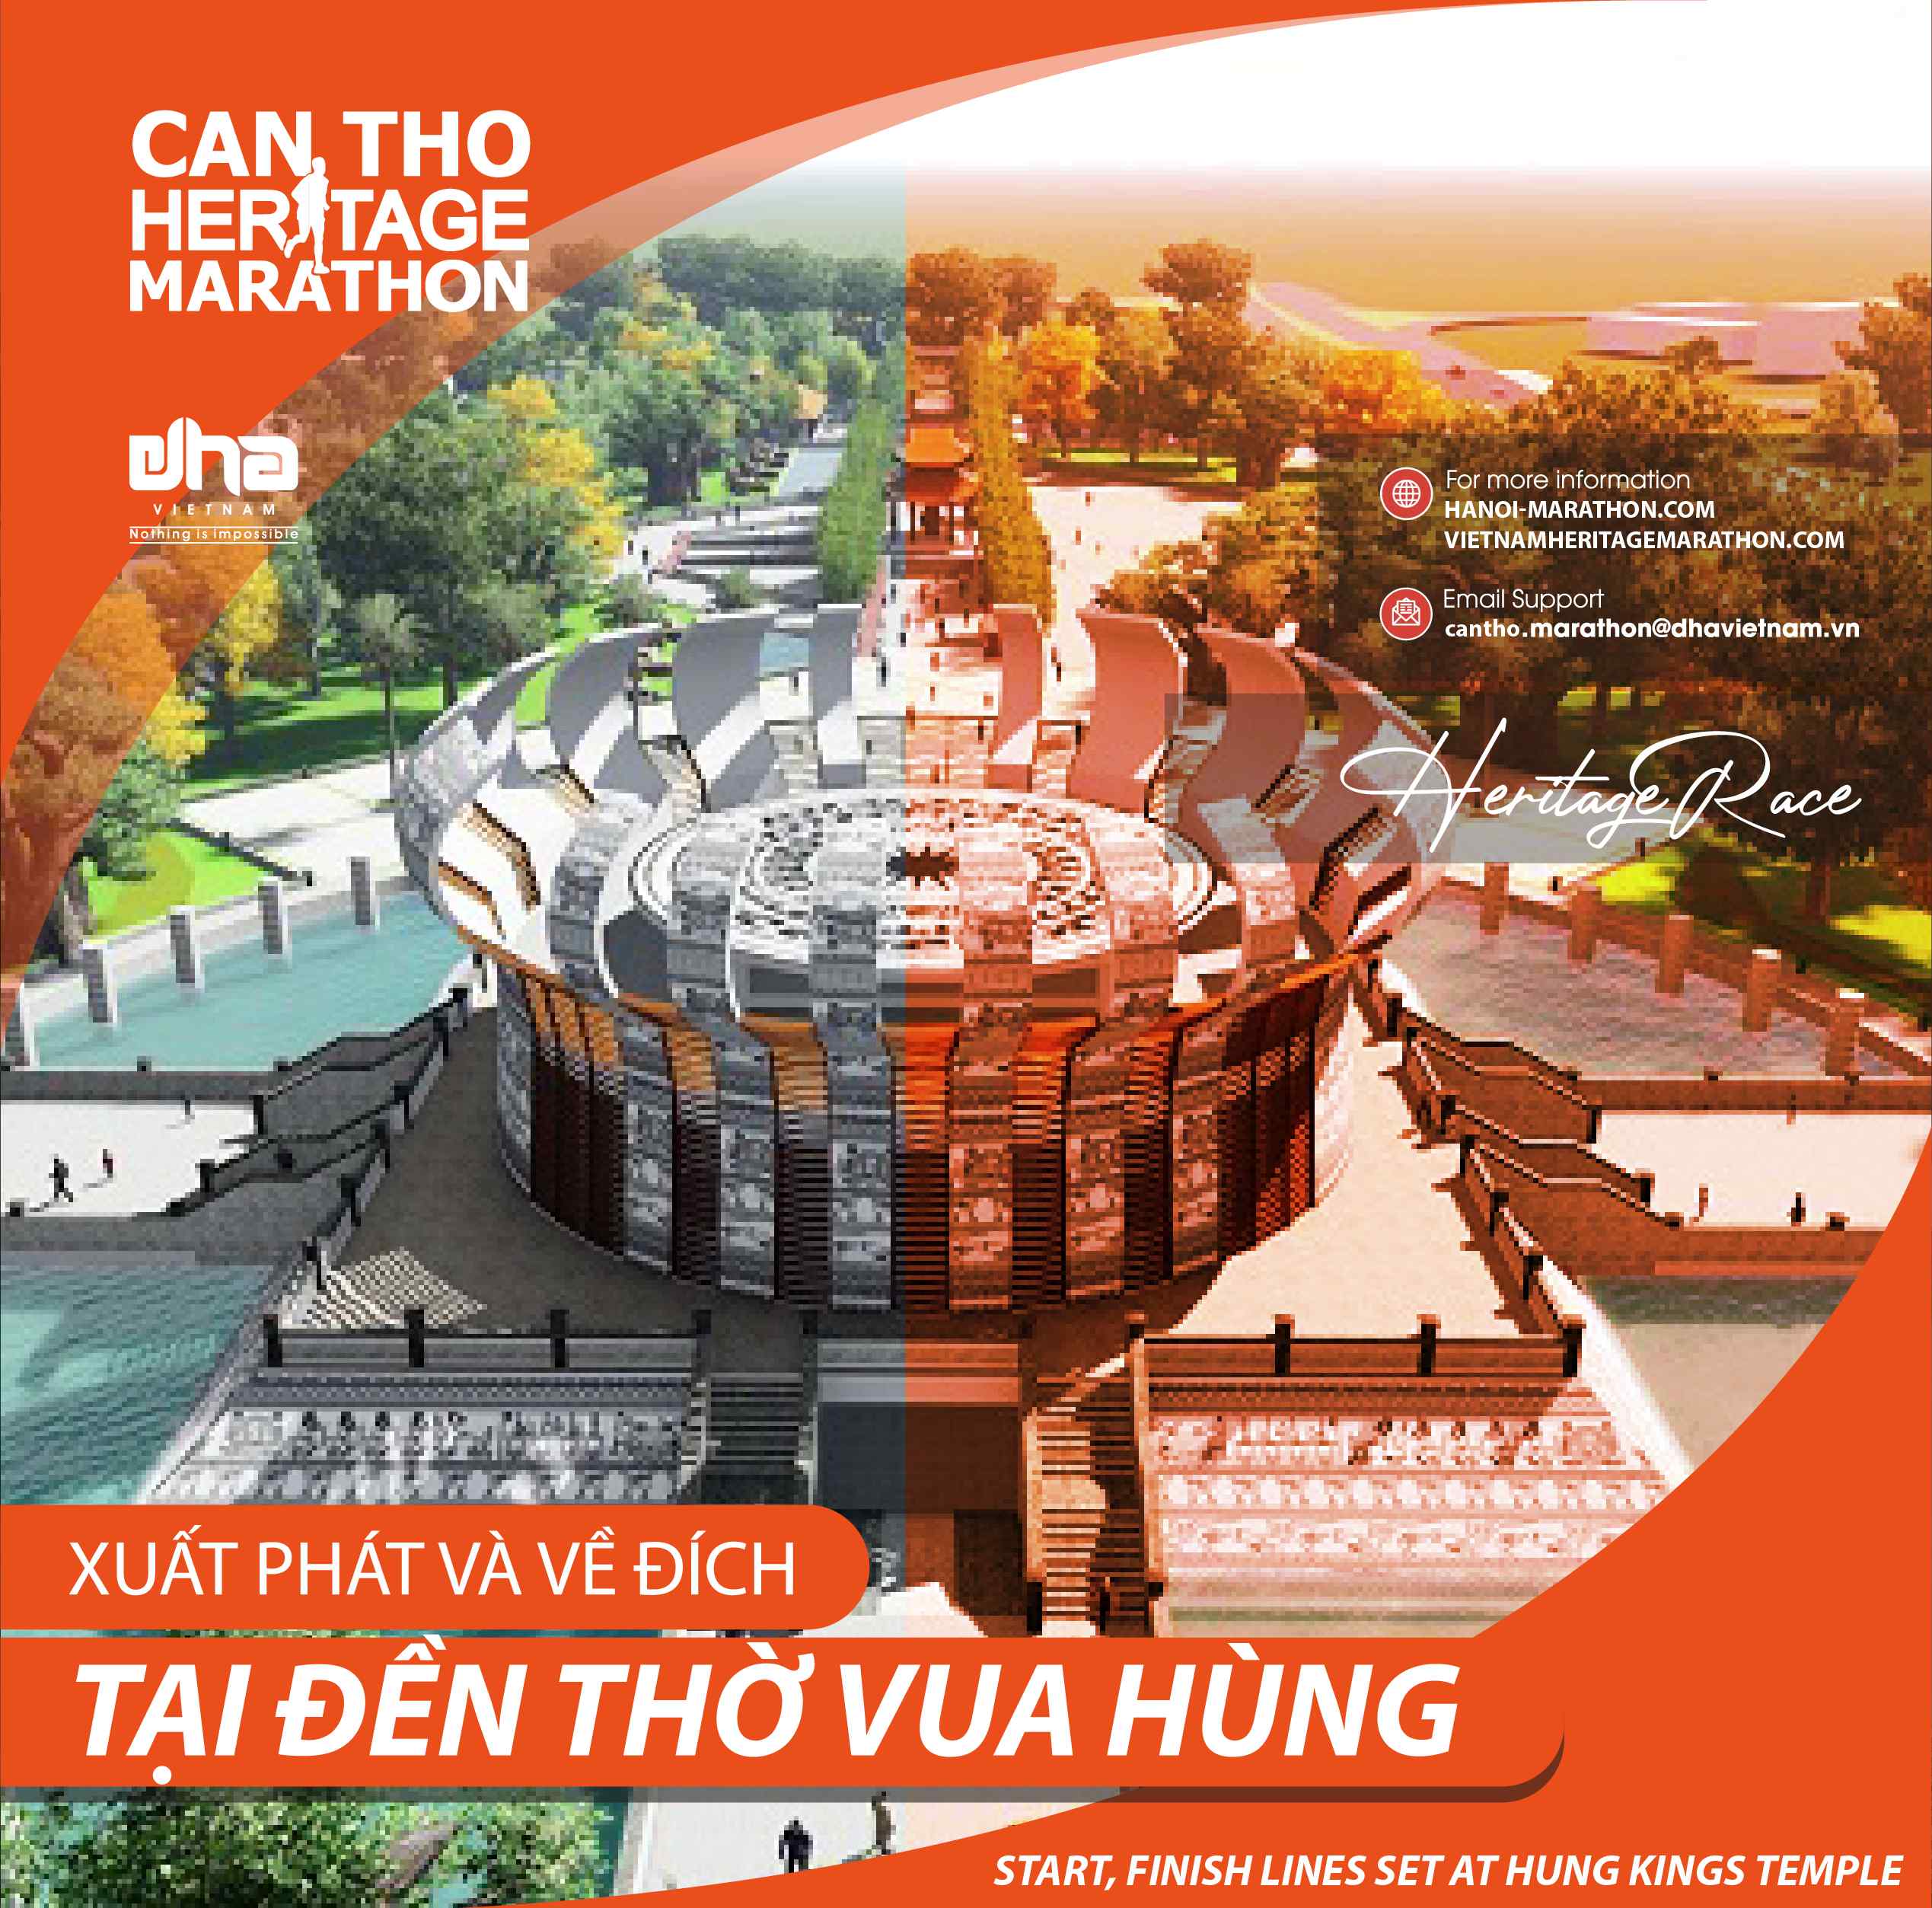 Can Tho Marathon – A Heritage Race 2022 to change Start, Finish lines